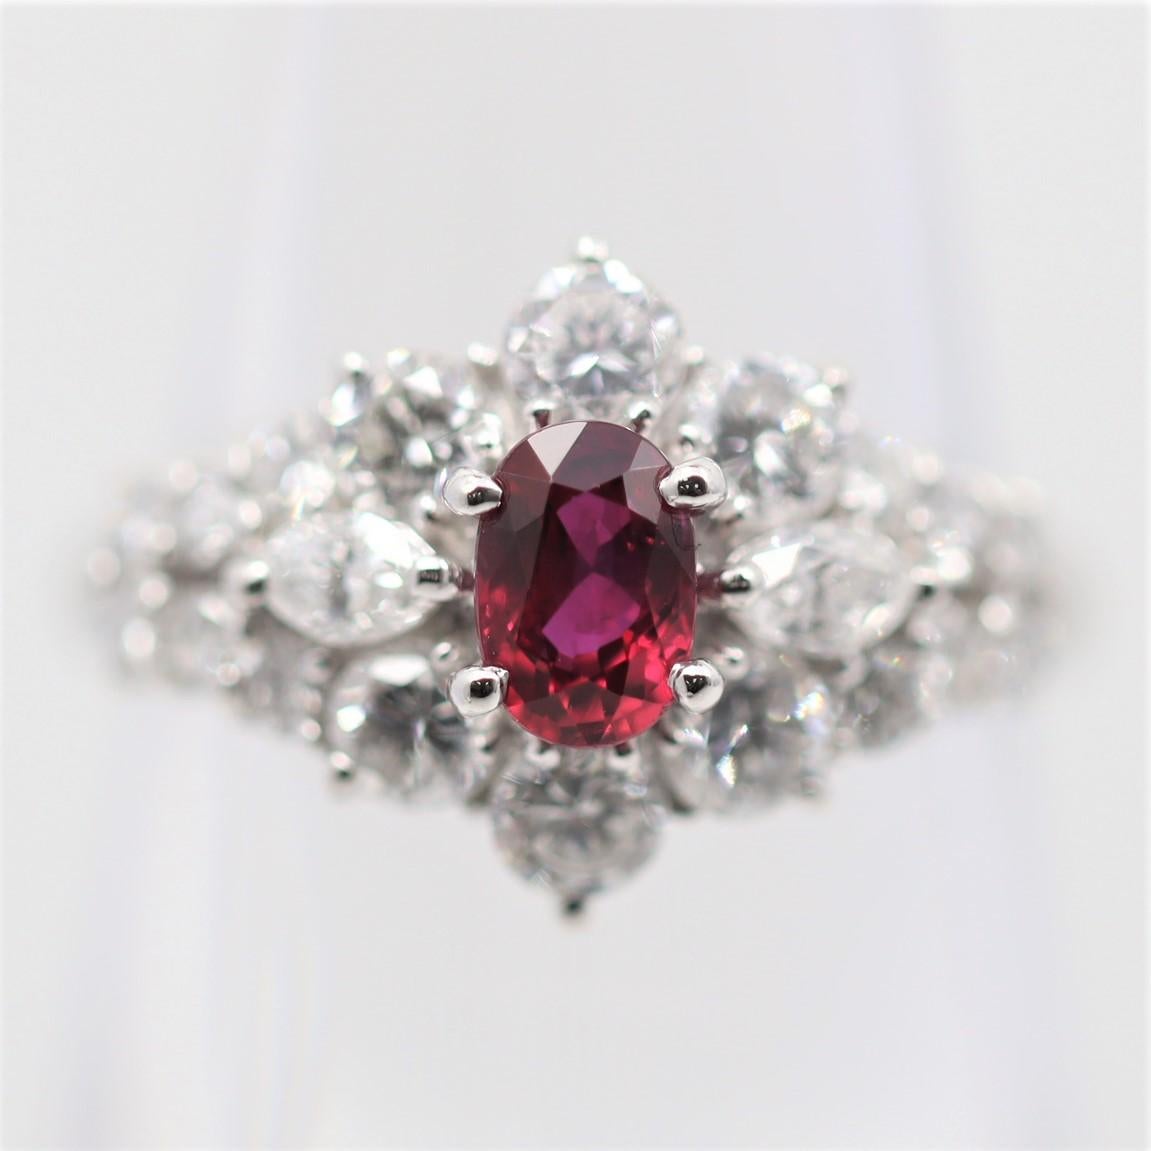 An elegant and chic ruby & diamond ring. It features a 0.64 carat oval shape ruby with a luscious vivid red gem color that will rival any other stone. It is accented by 1.36 carats of diamonds set around the ruby in a sunburst style. Hand-fabricated